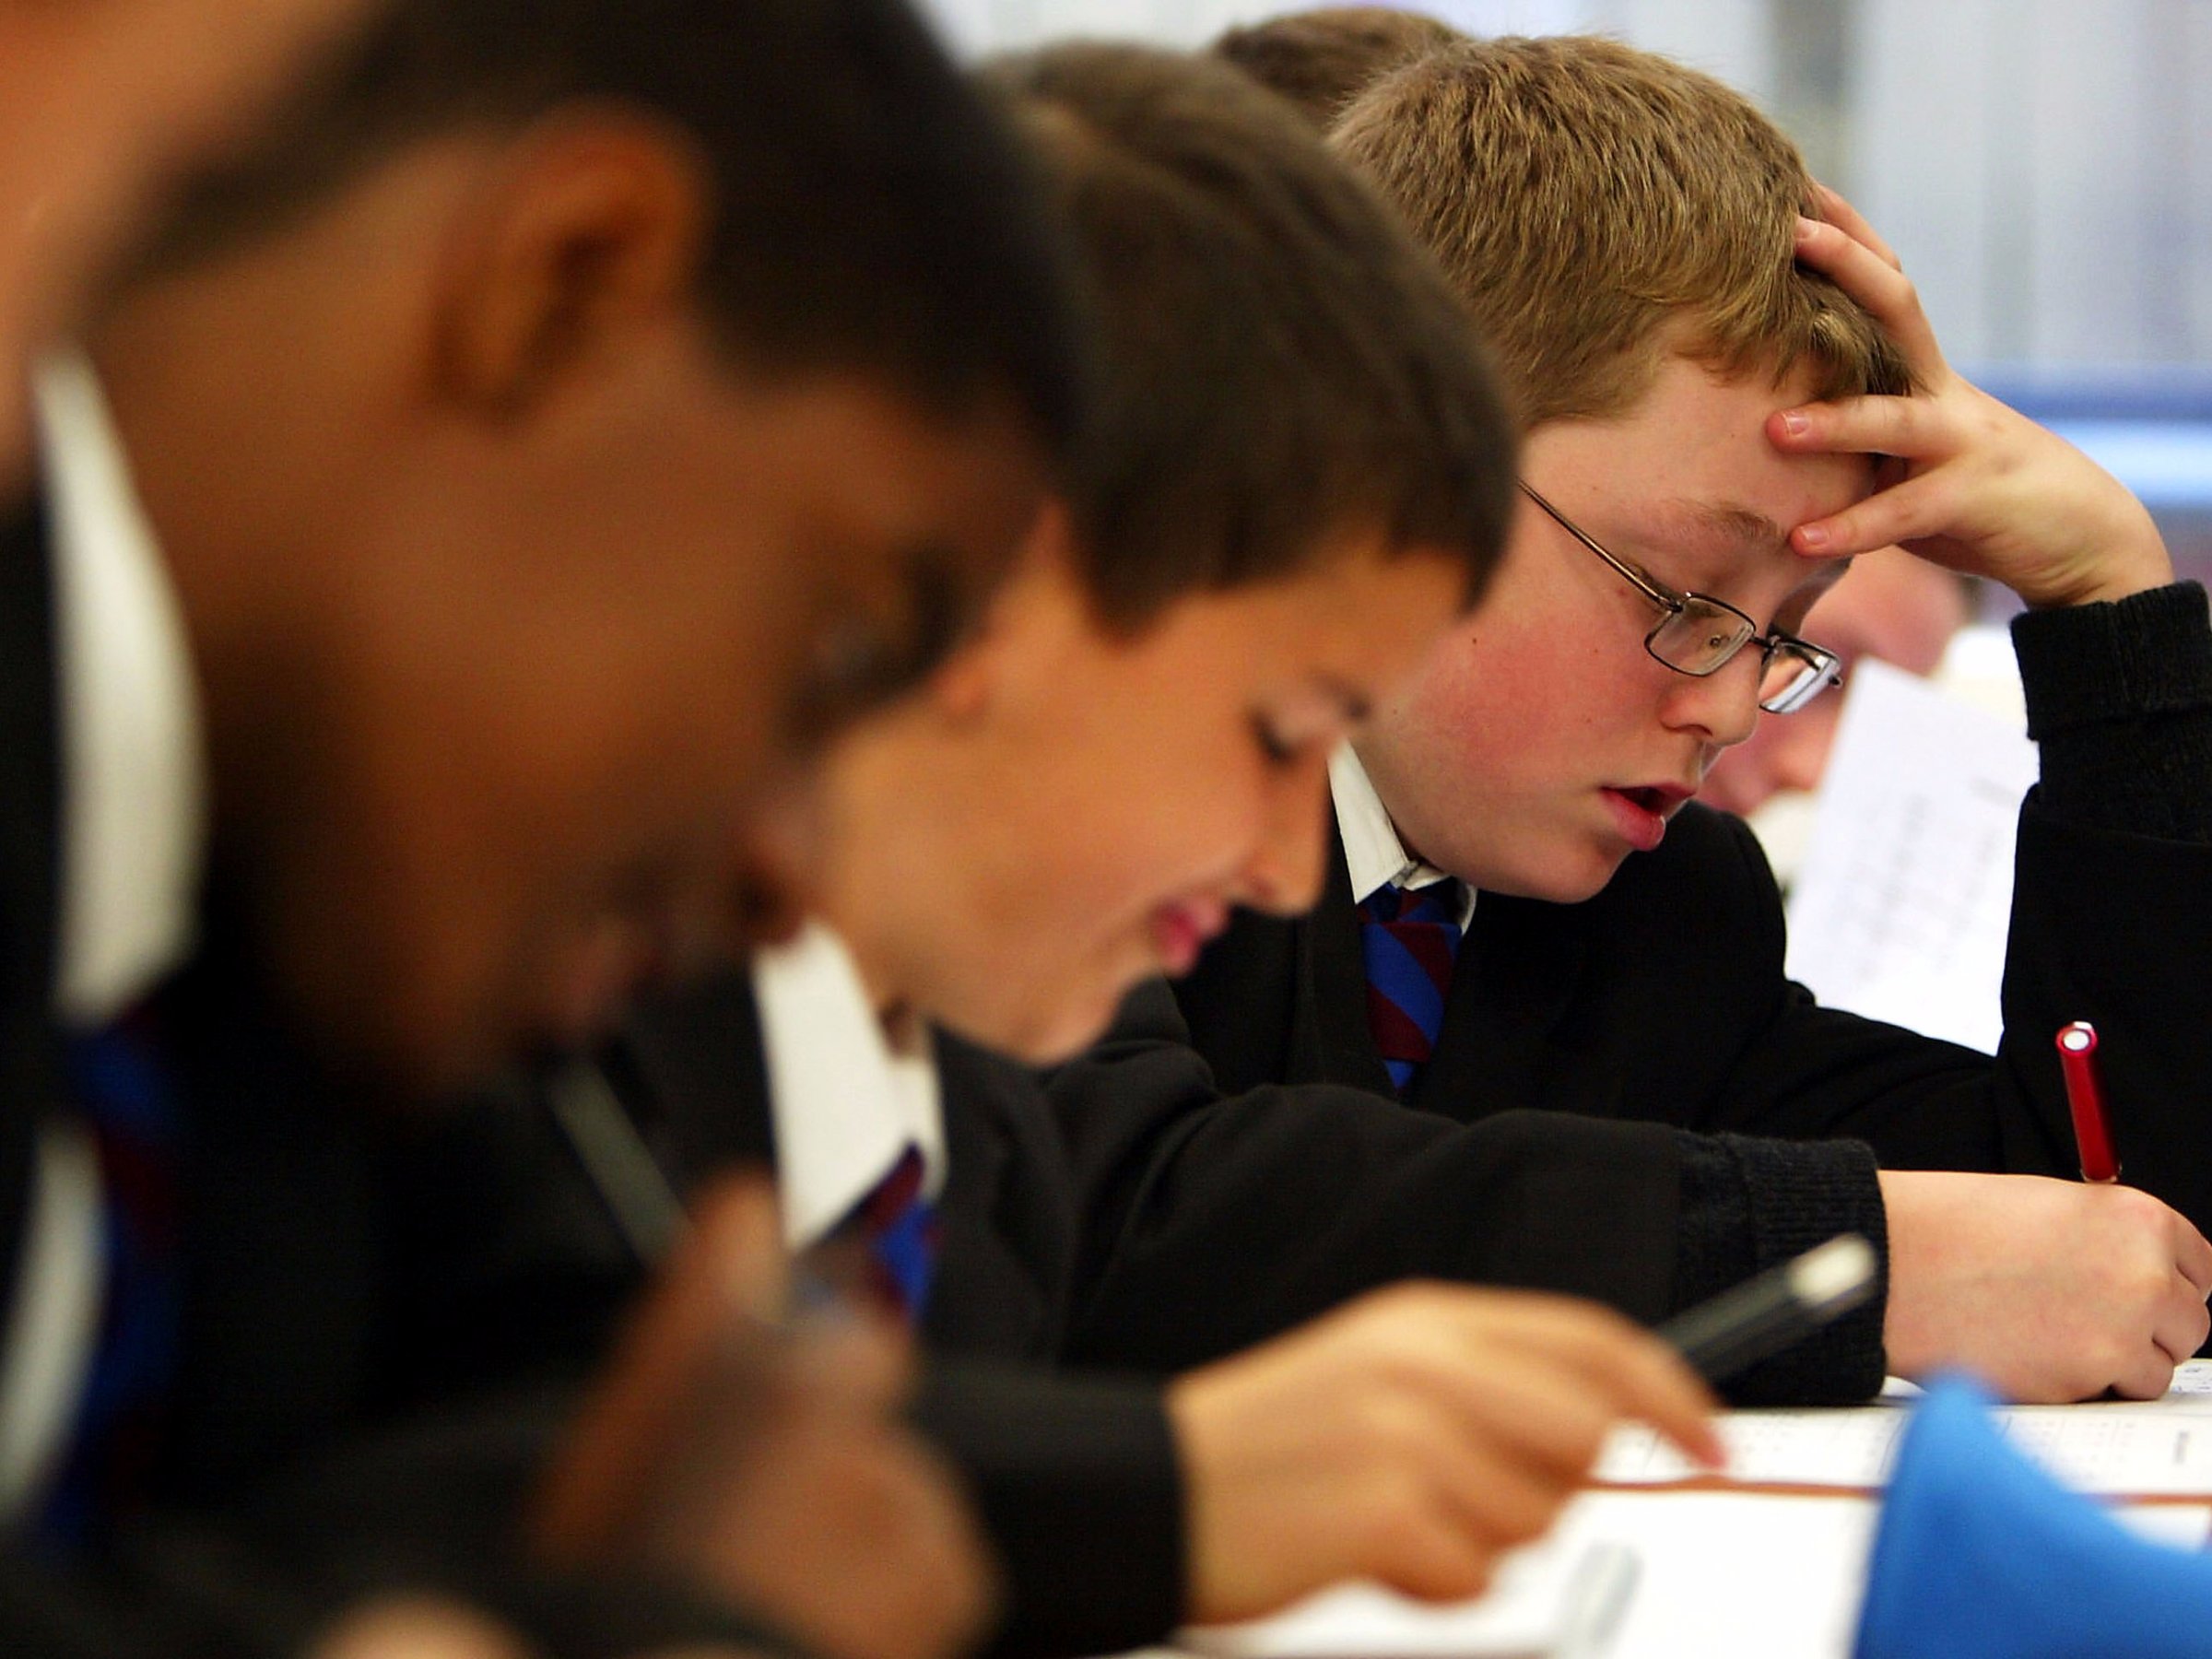 tudents work during a lesson at The Cardinal Vaughan Memorial School on September 4, 2003 in London. Students across the United Kingdom are returning to school for the start of the 2003/4 academic year.